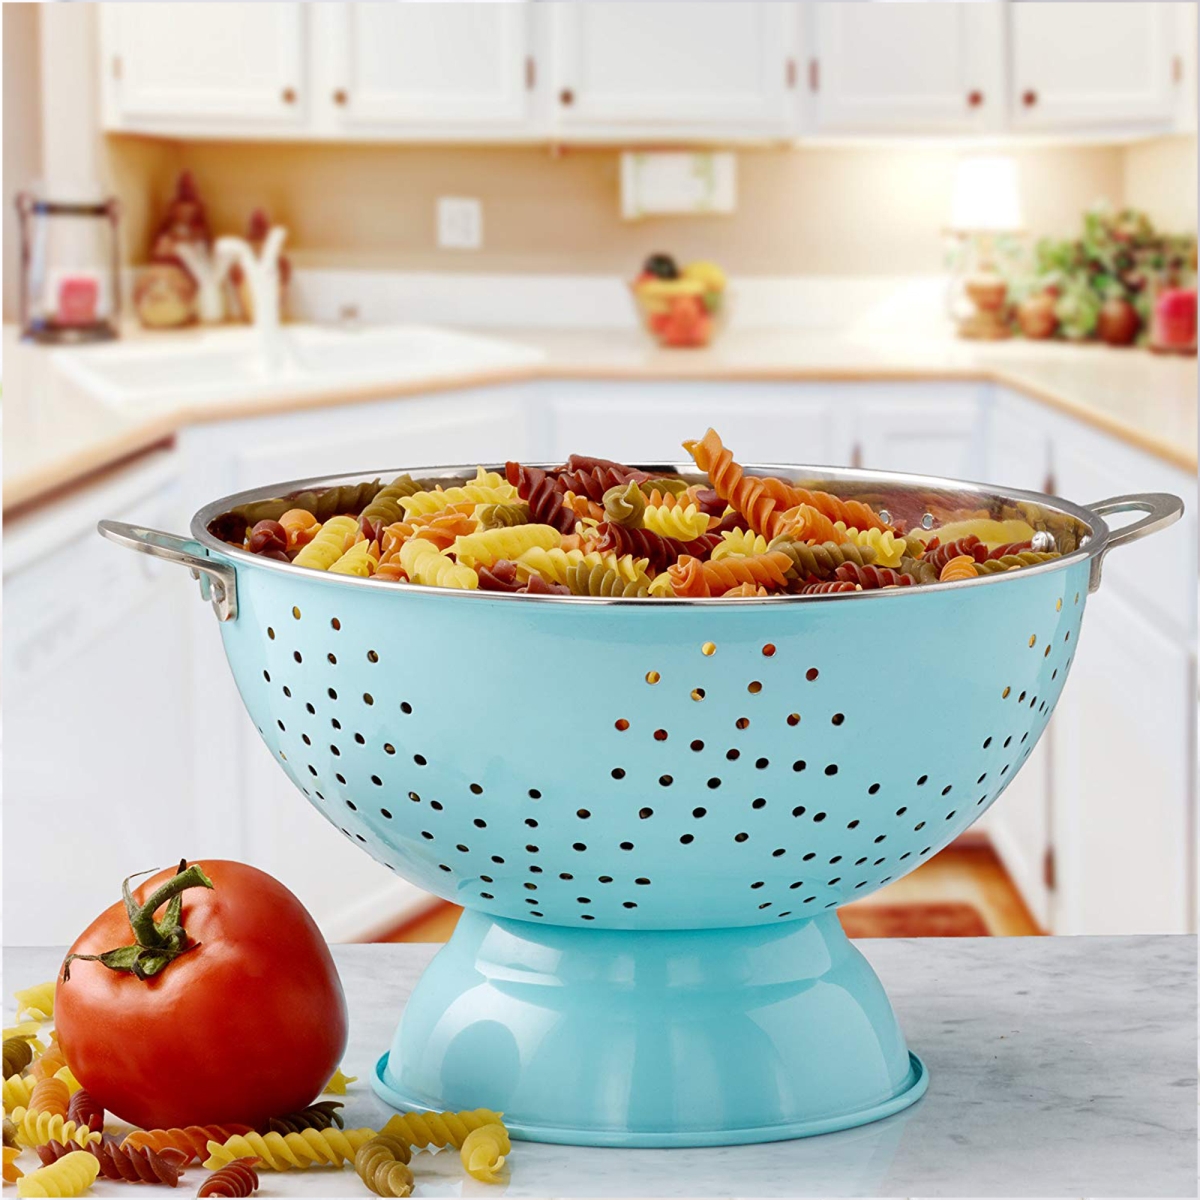 Picture of Nusteel TG-769 9 in. Colander With Handles, Aqua Blue